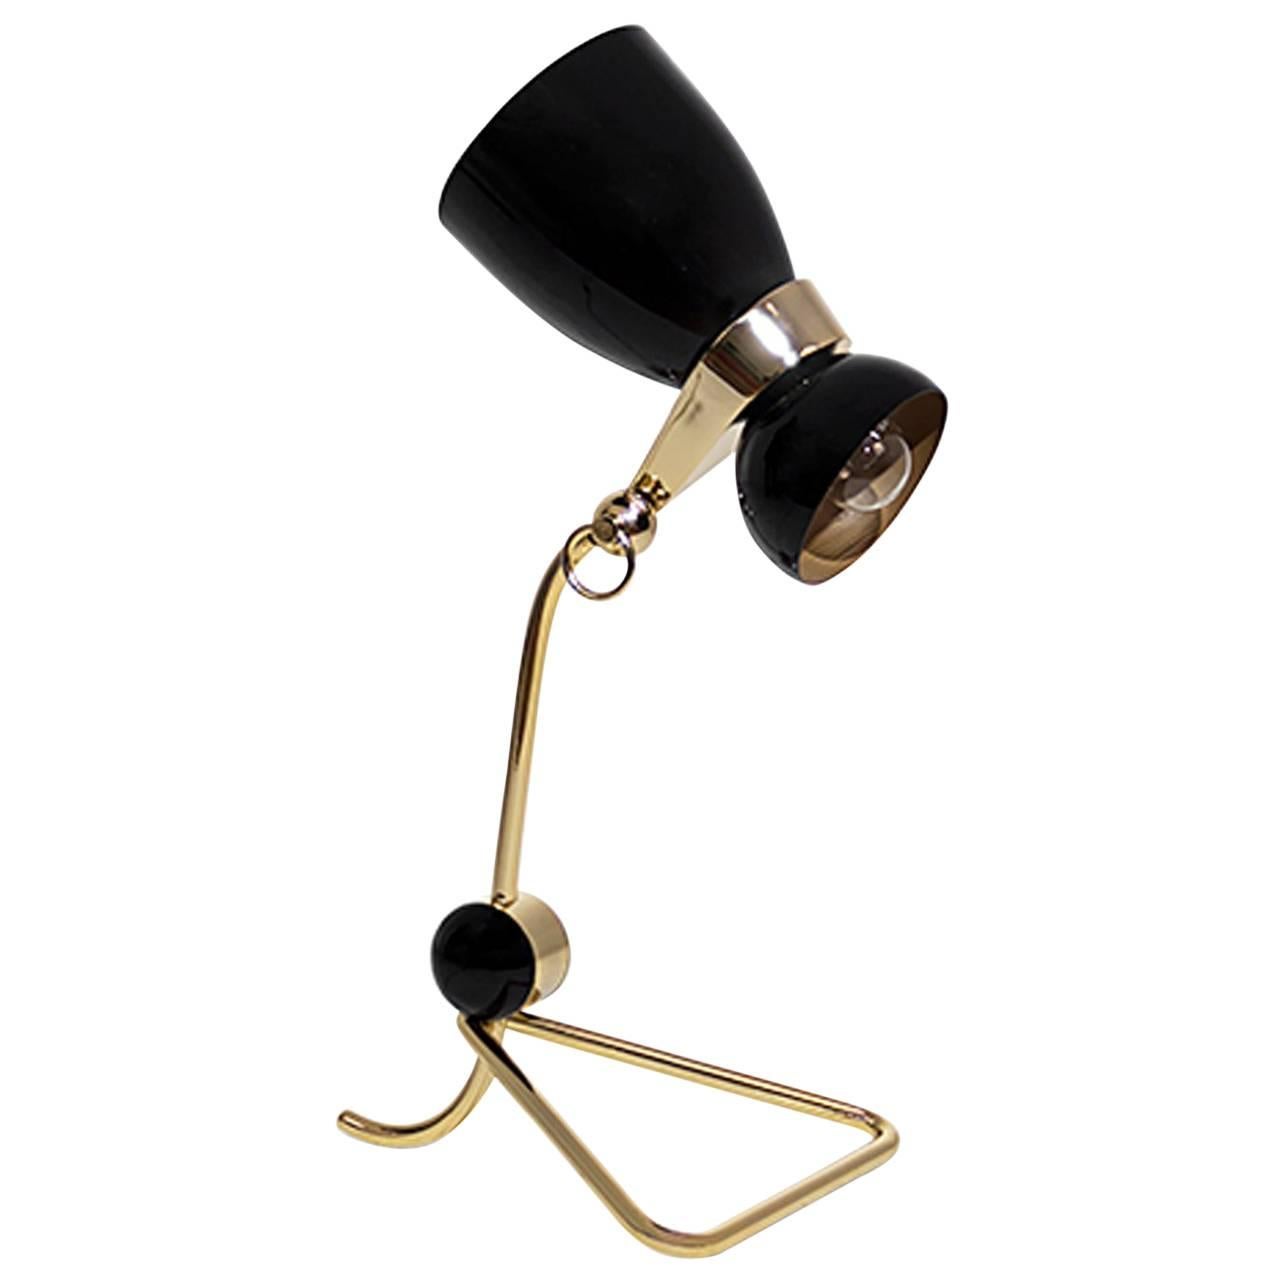 Retro Table Lamp in Glossy Black Finish and Gold Plate Structure